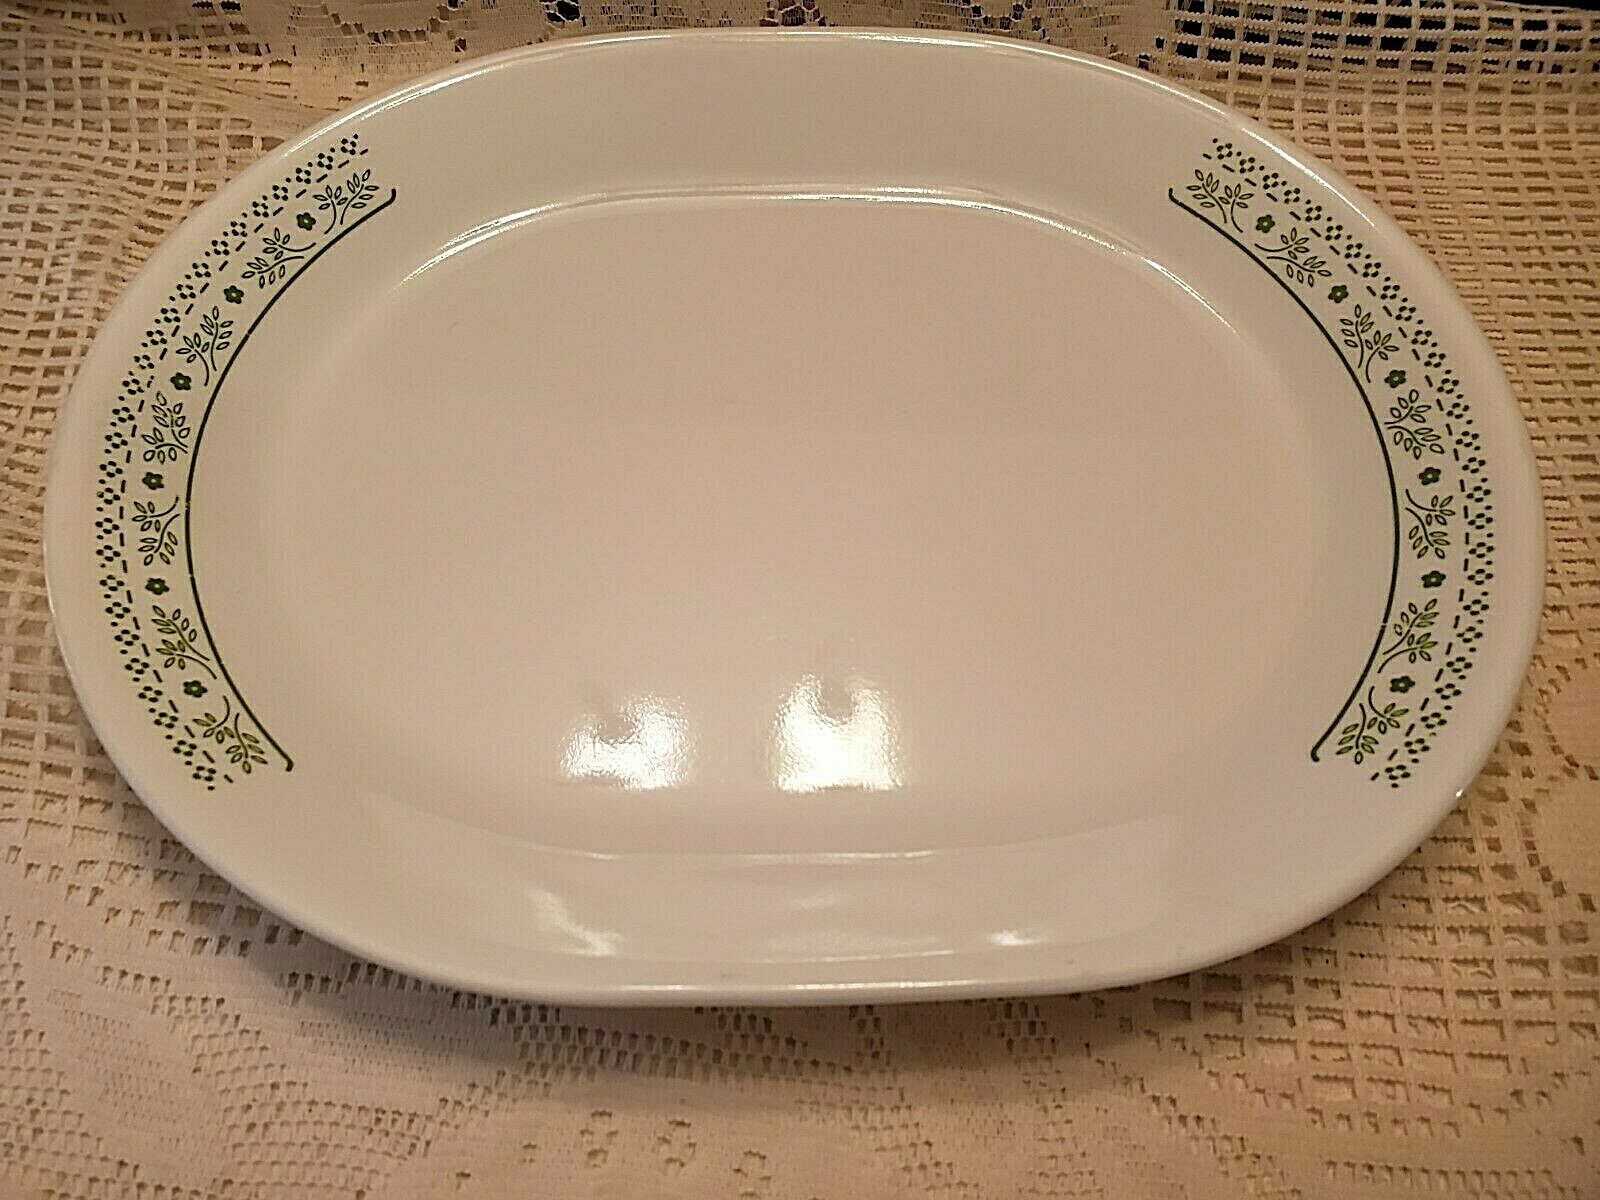 Primary image for CORELLE 12" PLATTER WITH A LIGHT GREEN LEAFY DESIGN